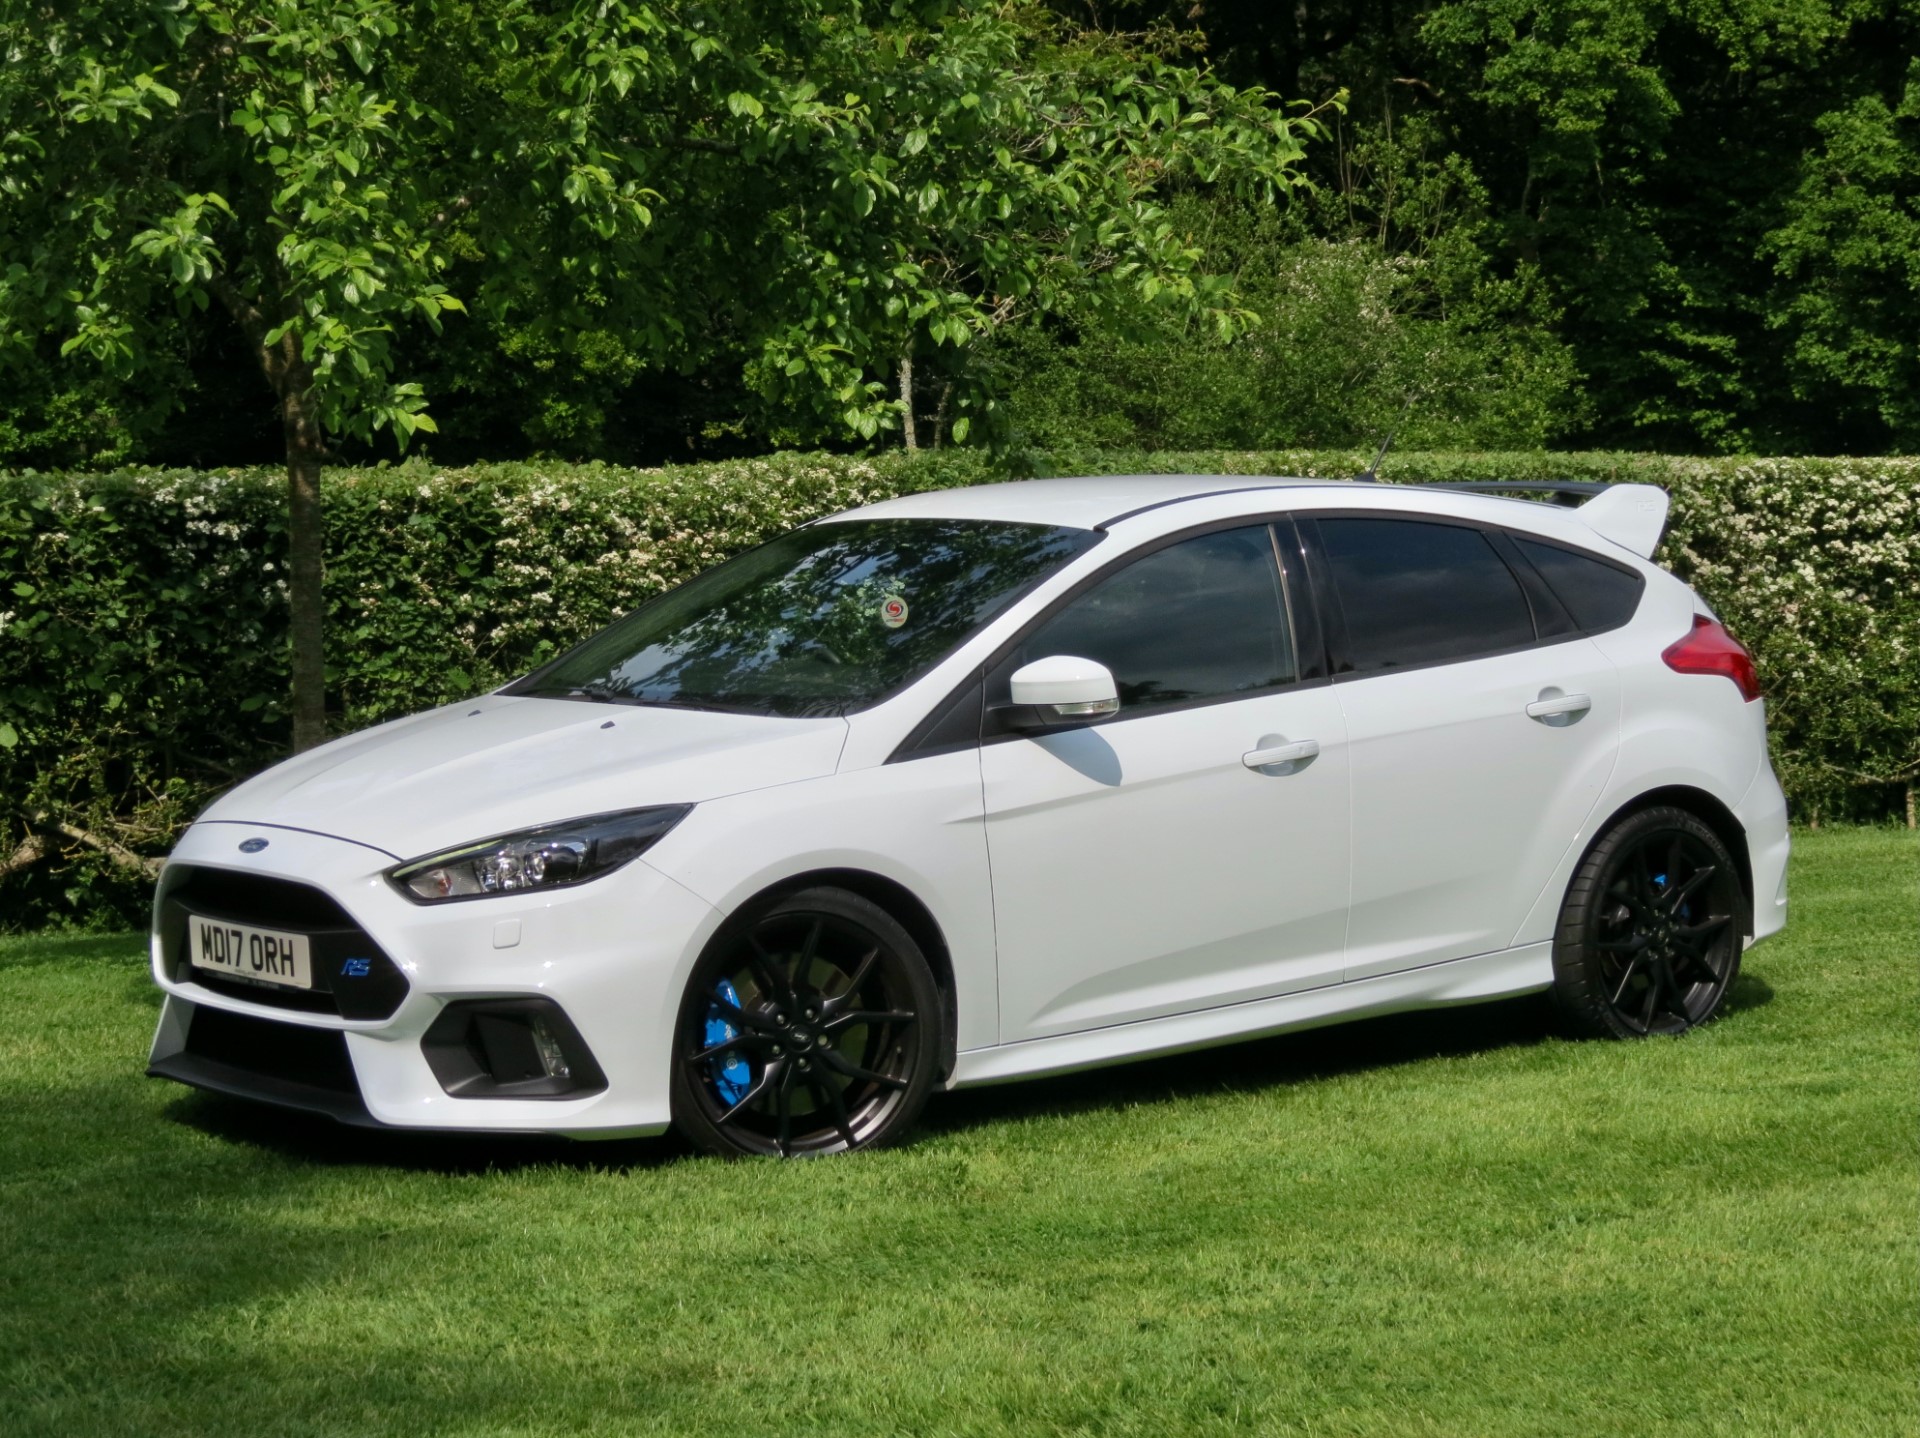 Used Ford Focus for sale in Towcester, Northamptonshire